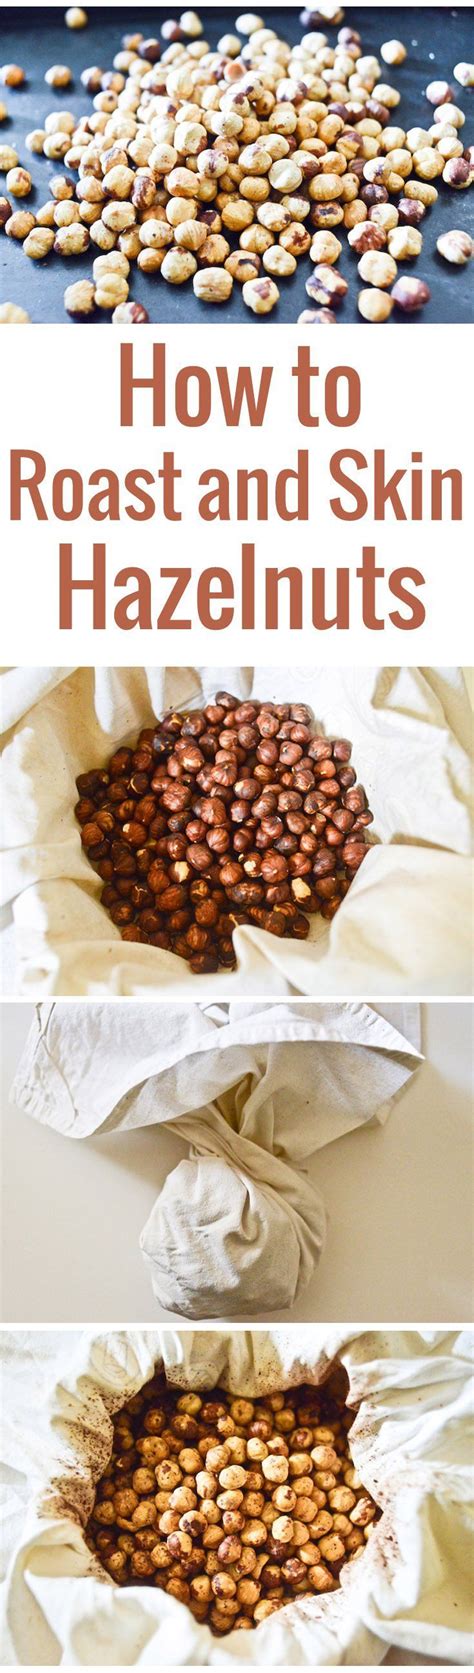 Step By Step Instructions And Pictures To Roast Hazelnuts In The Oven